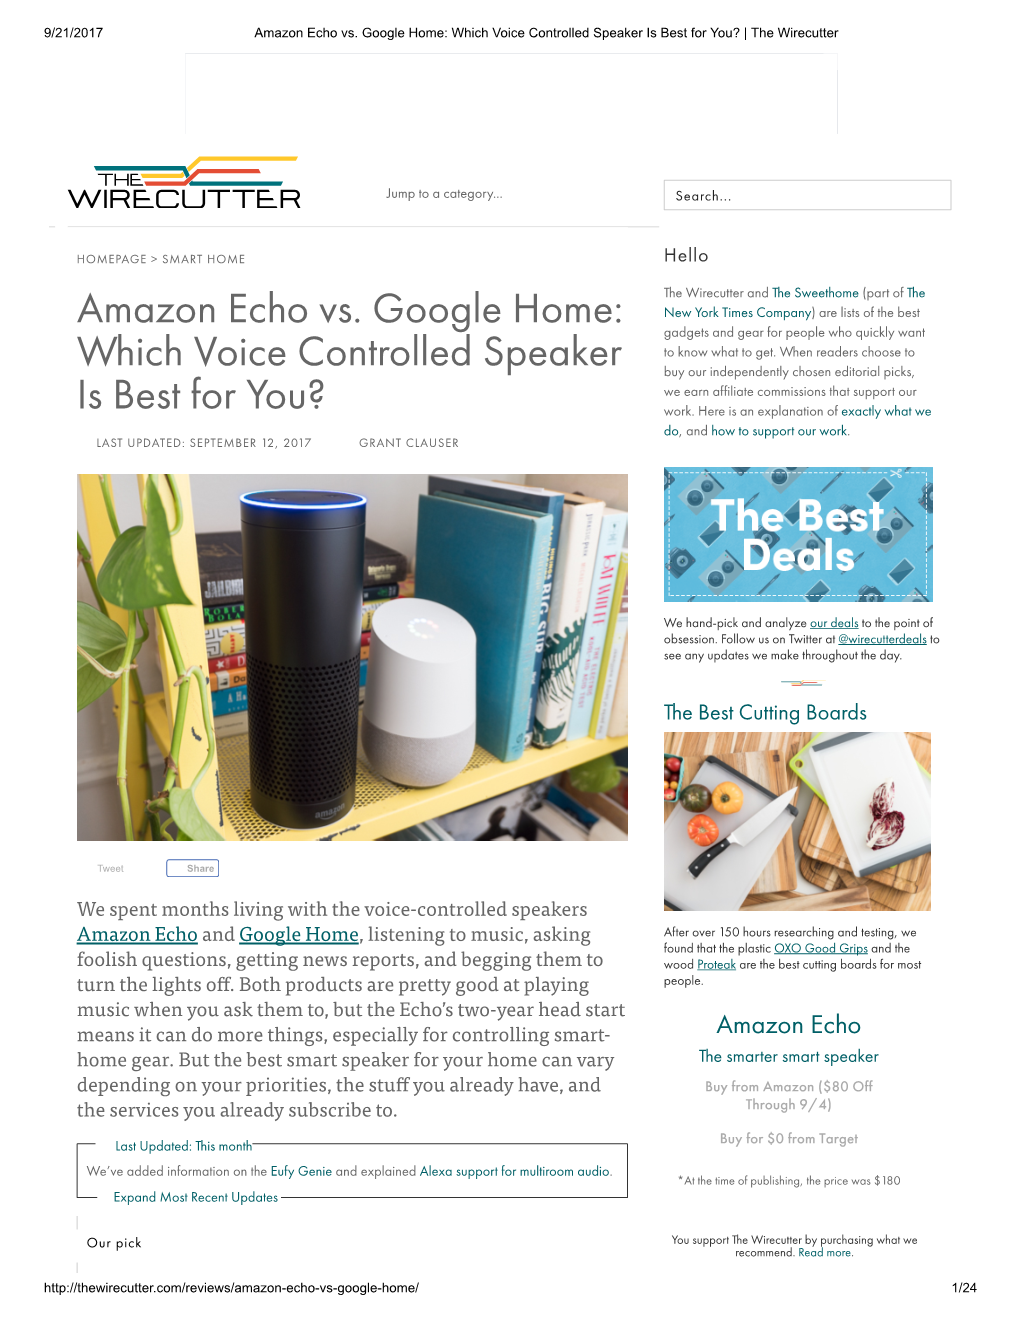 Amazon Echo Vs. Google Home: Which Voice Controlled Speaker Is Best for You? | the Wirecutter